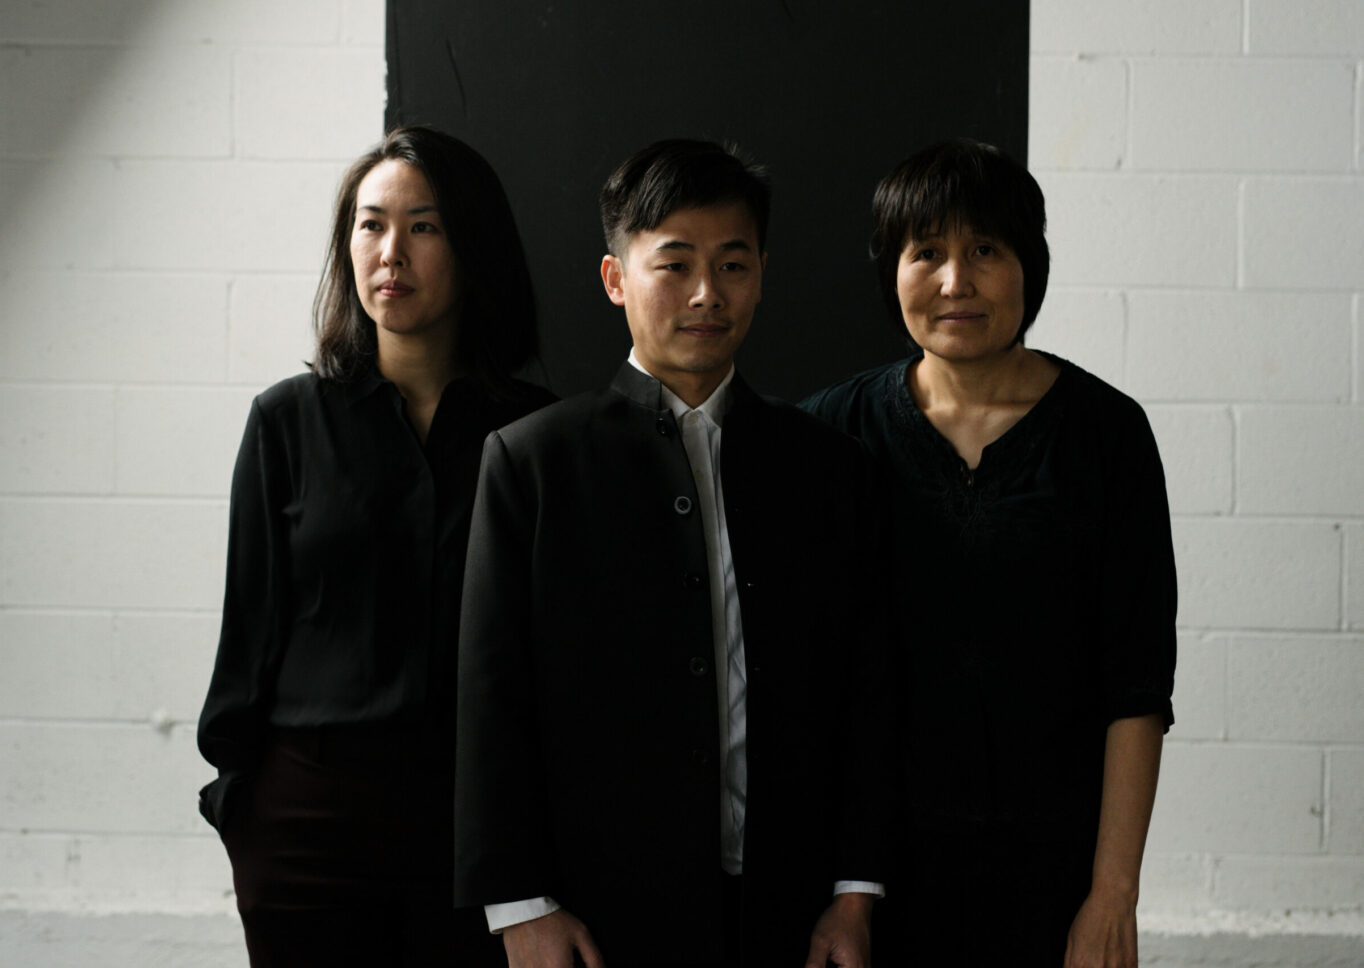 San Ureshi band members- three people all dressed in black, stand posed in different angles in front of a white brick wall.